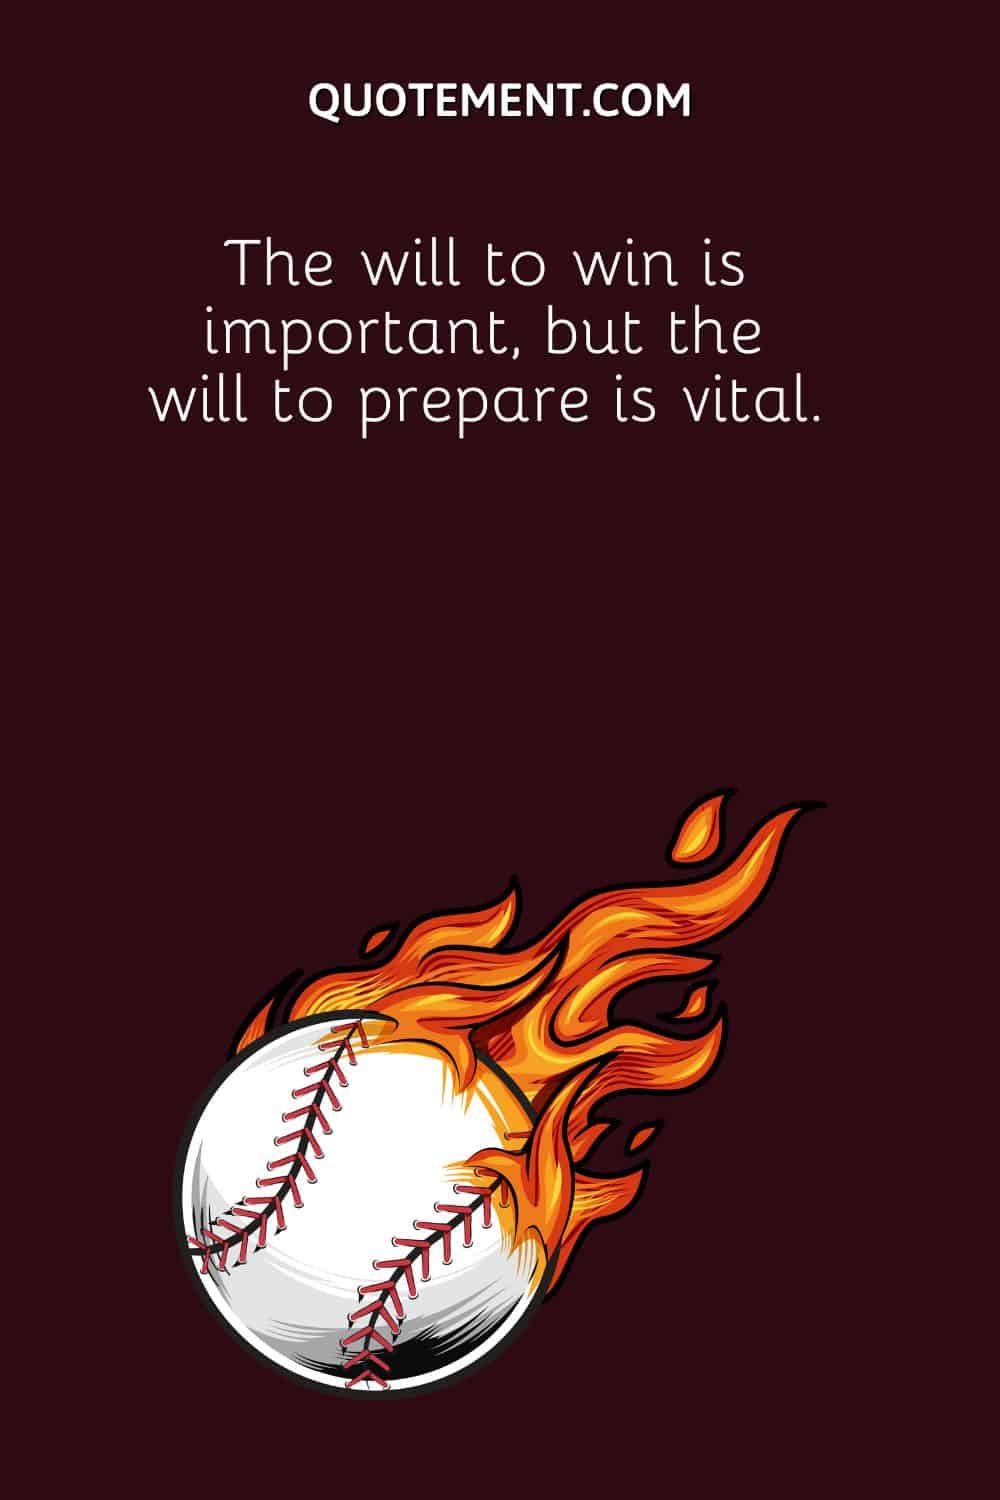 The will to win is important, but the will to prepare is vital